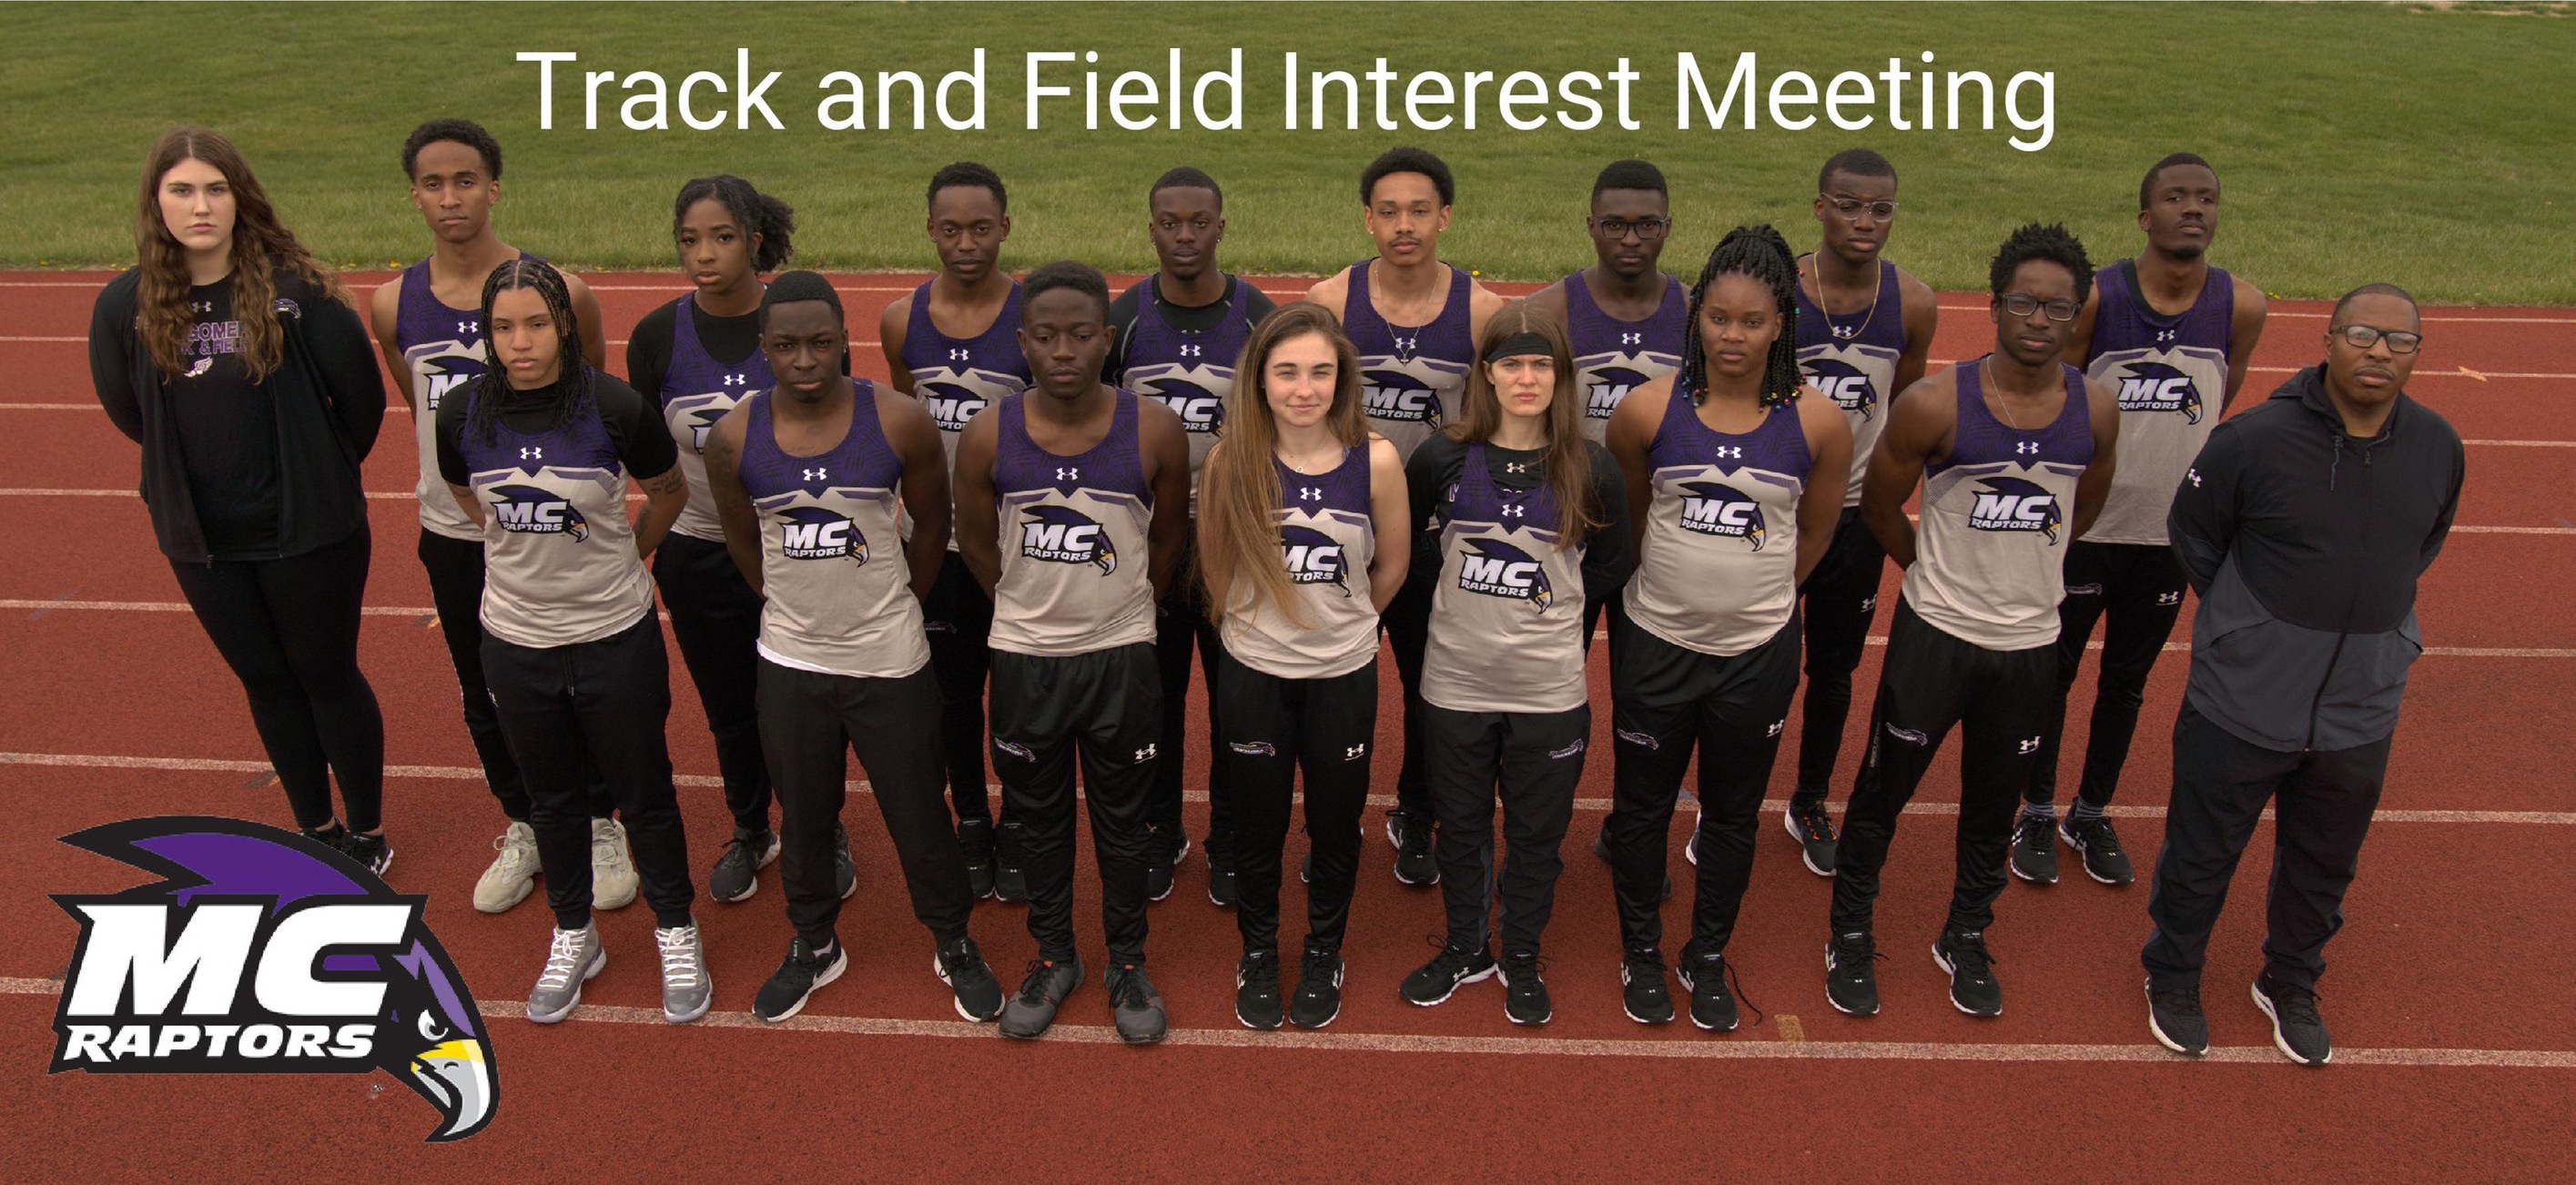 Track and Field Interest Meeting